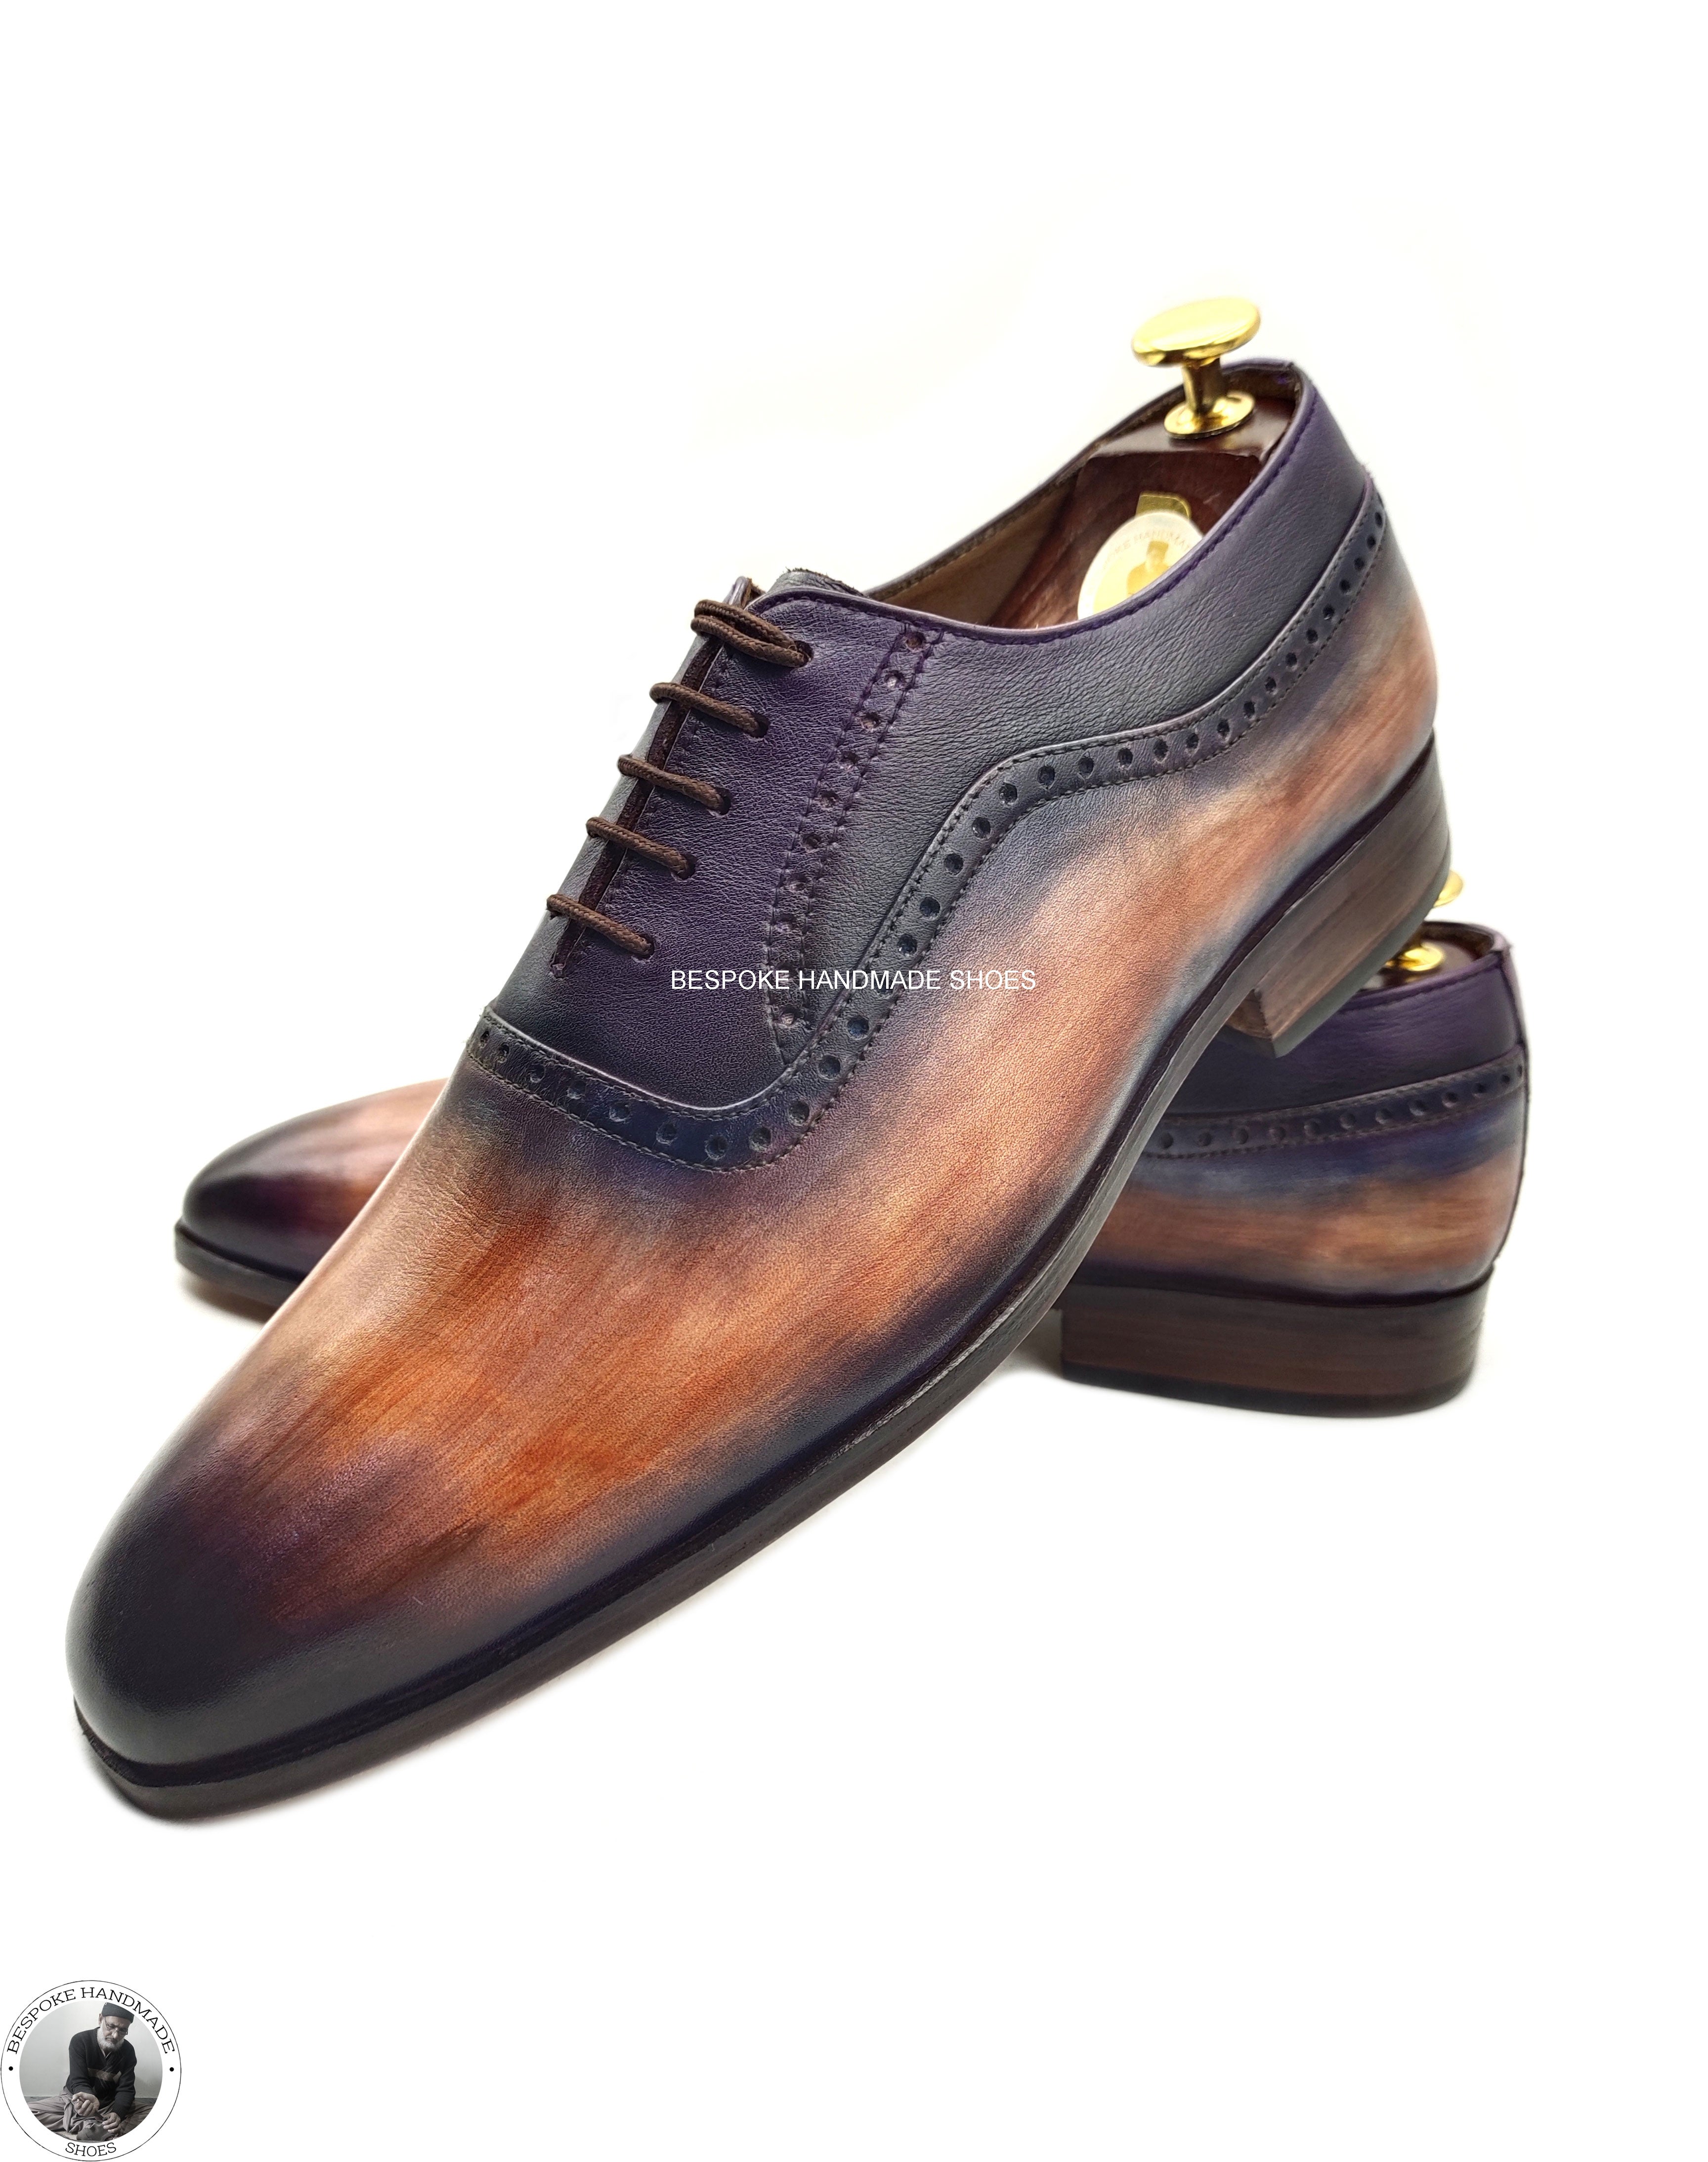 Bespoke Real Leather Shoes, Two Tone Oxford Wholecut Lace up Dress / Formal Shoe